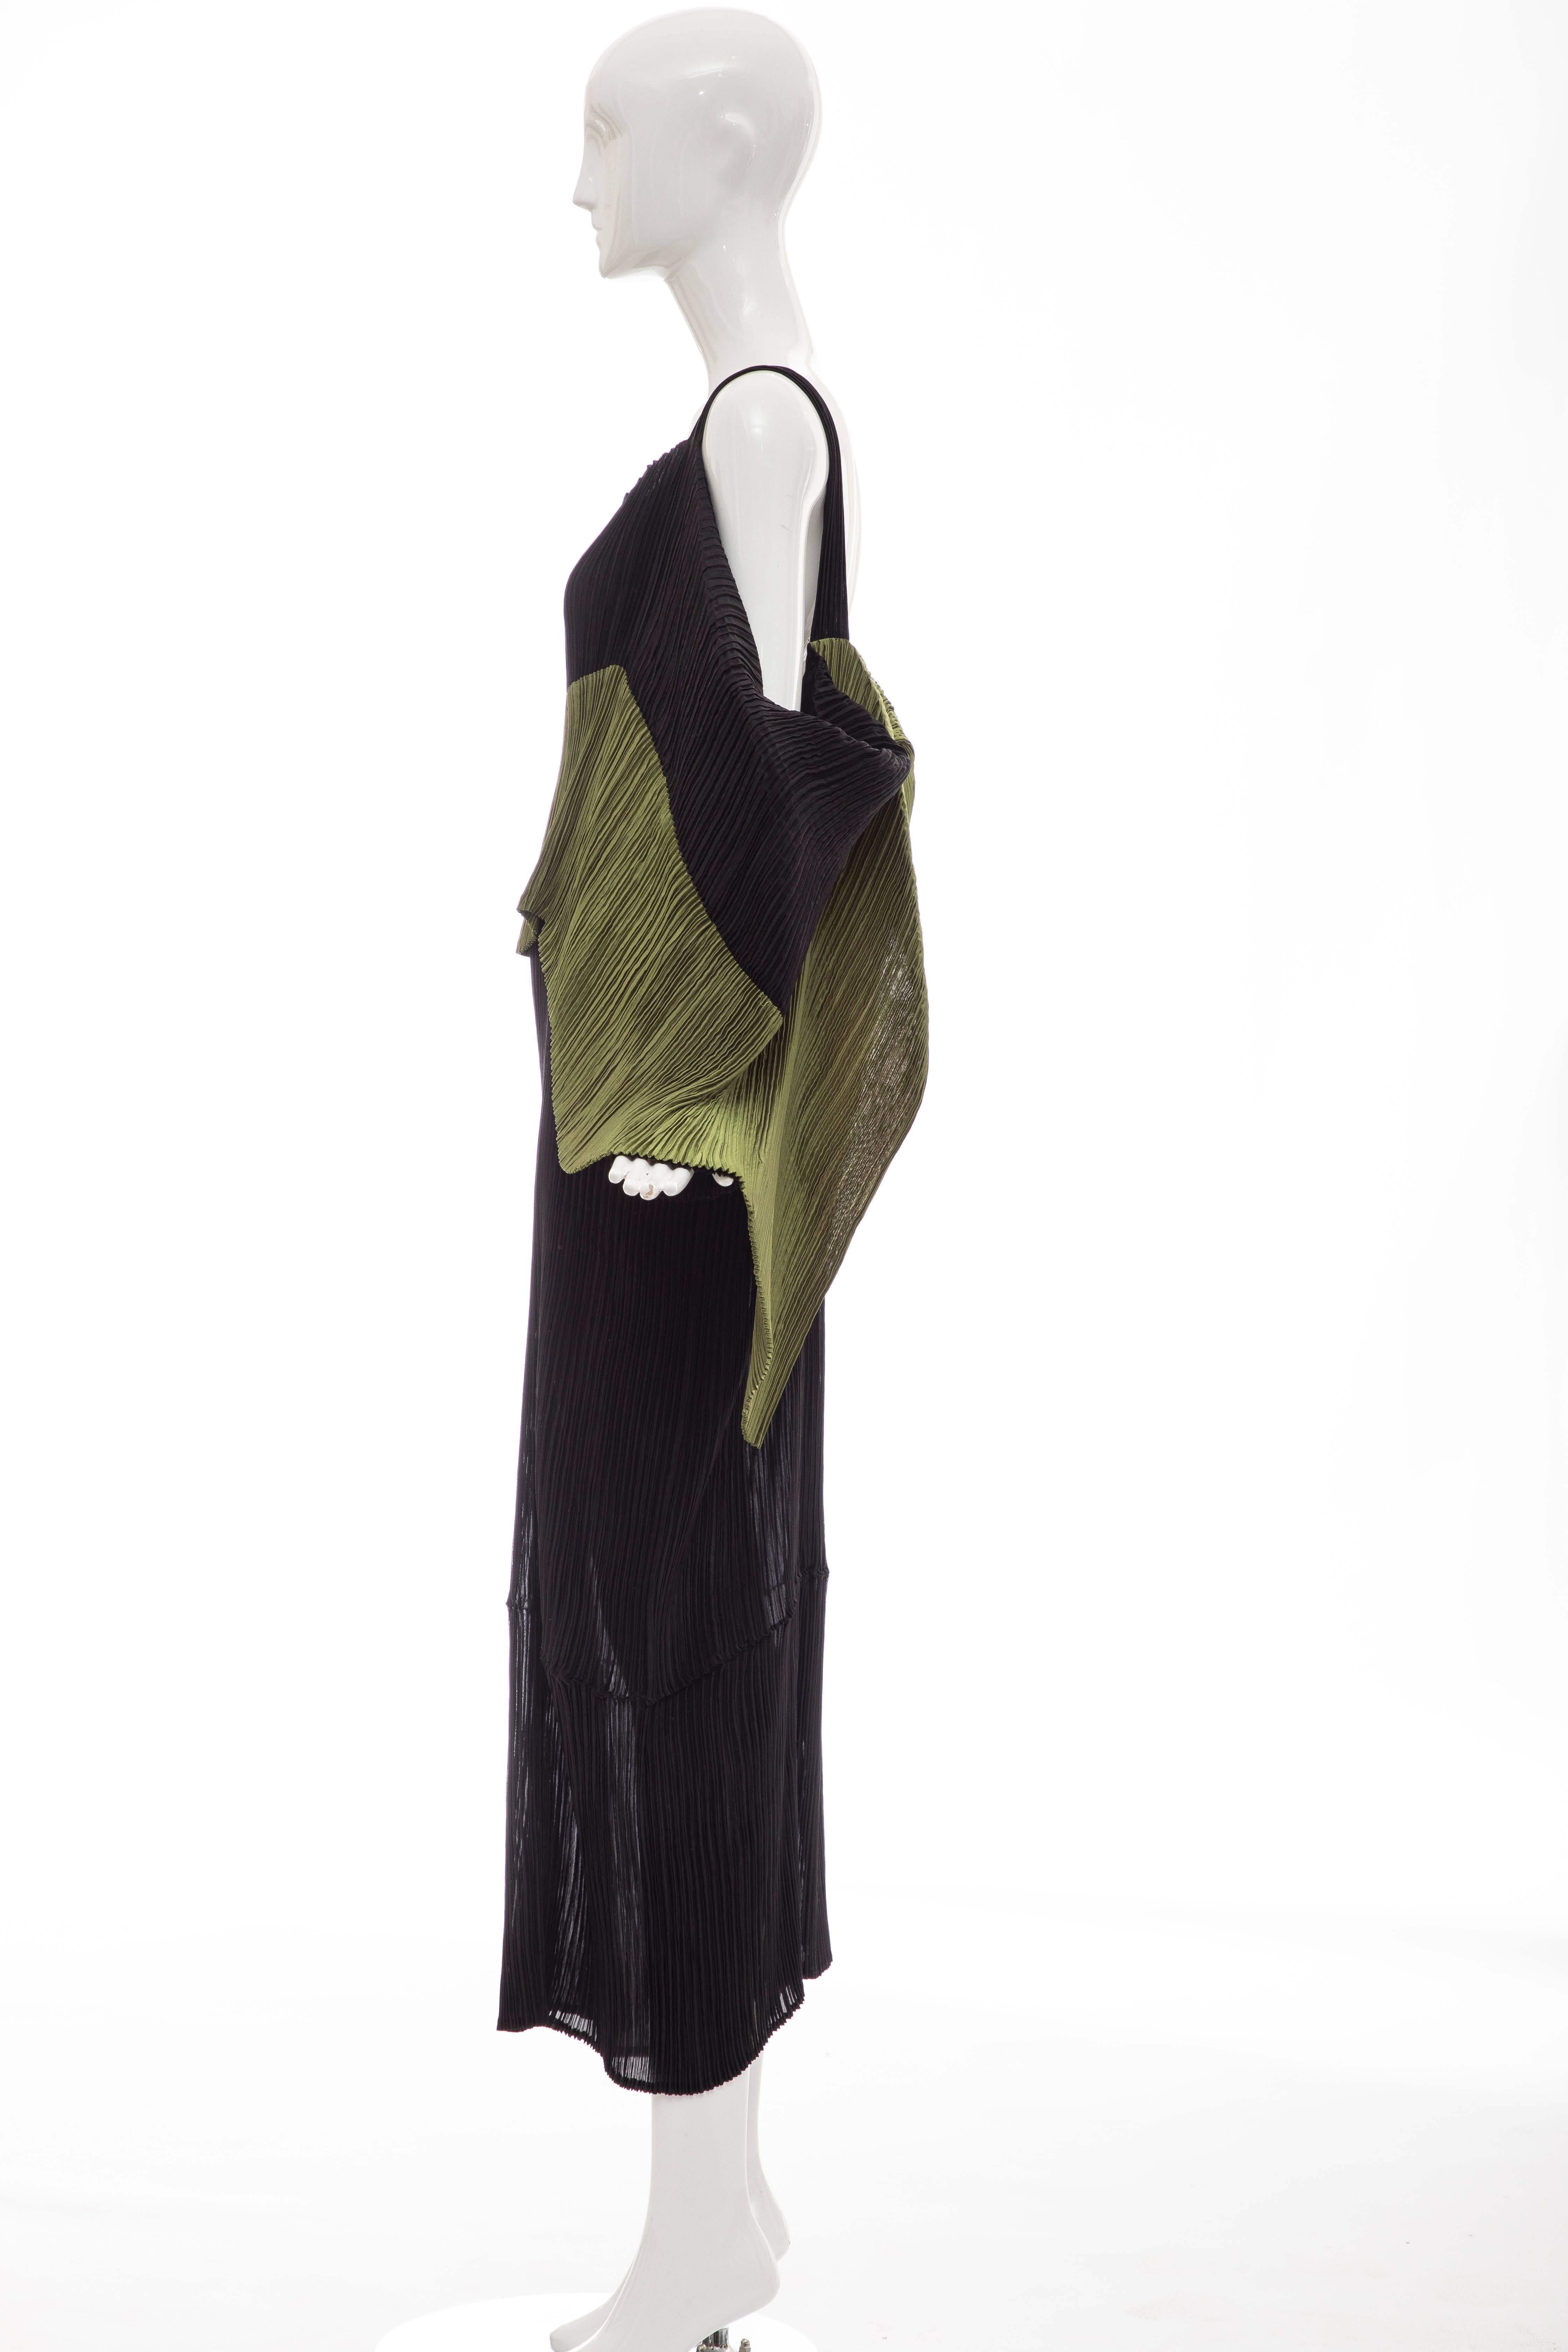 Issey Miyake Black Pleated Dress With Olive Green Panel At Bodice, Circa 1990s 4